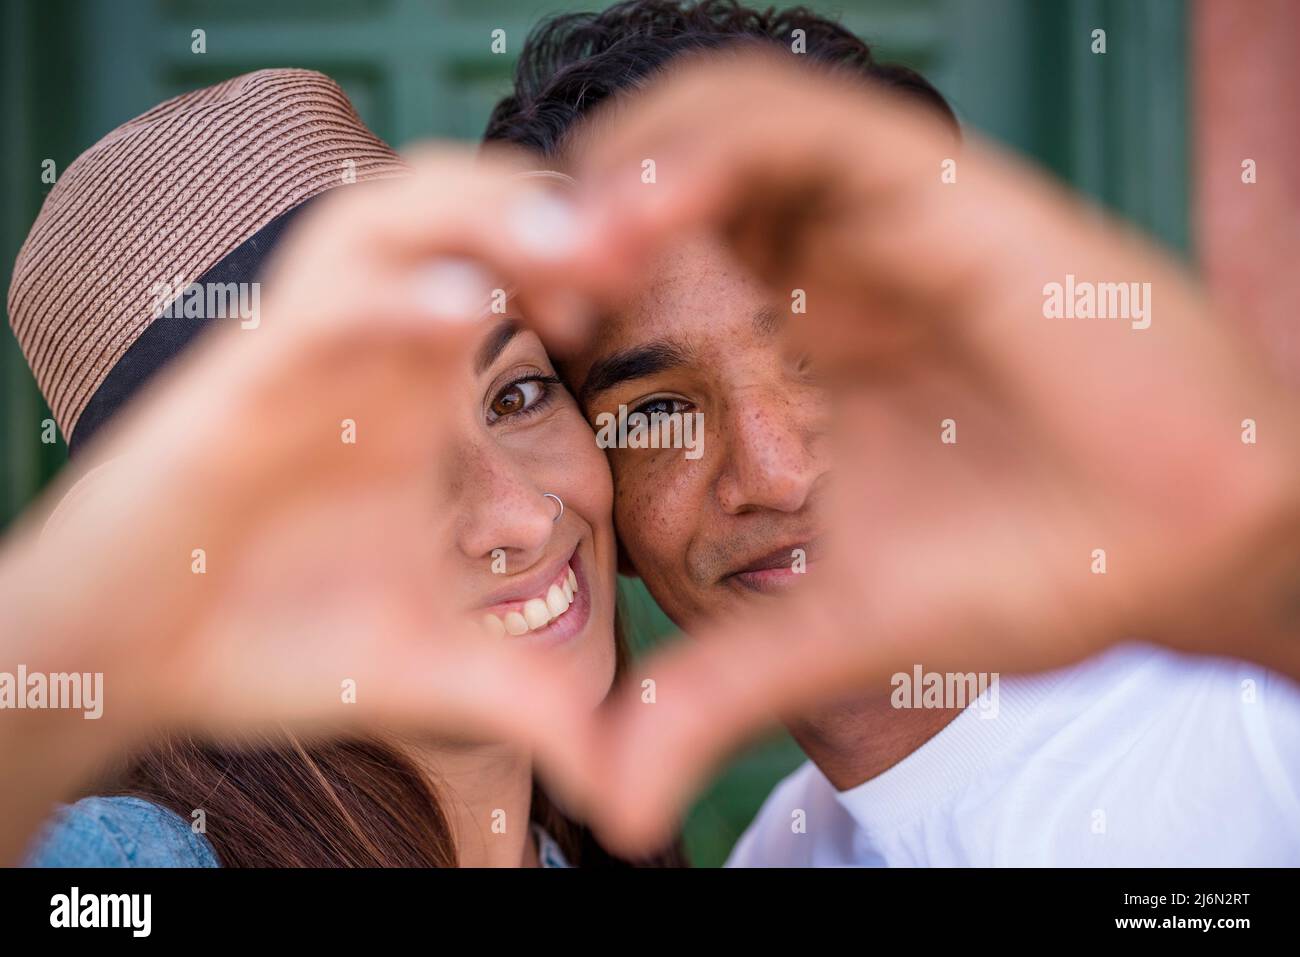 mixed race couple do hearth sign with hands looking to camera love and relationship concept with young man and woman boyfriend girlfriend 2J6N2RT